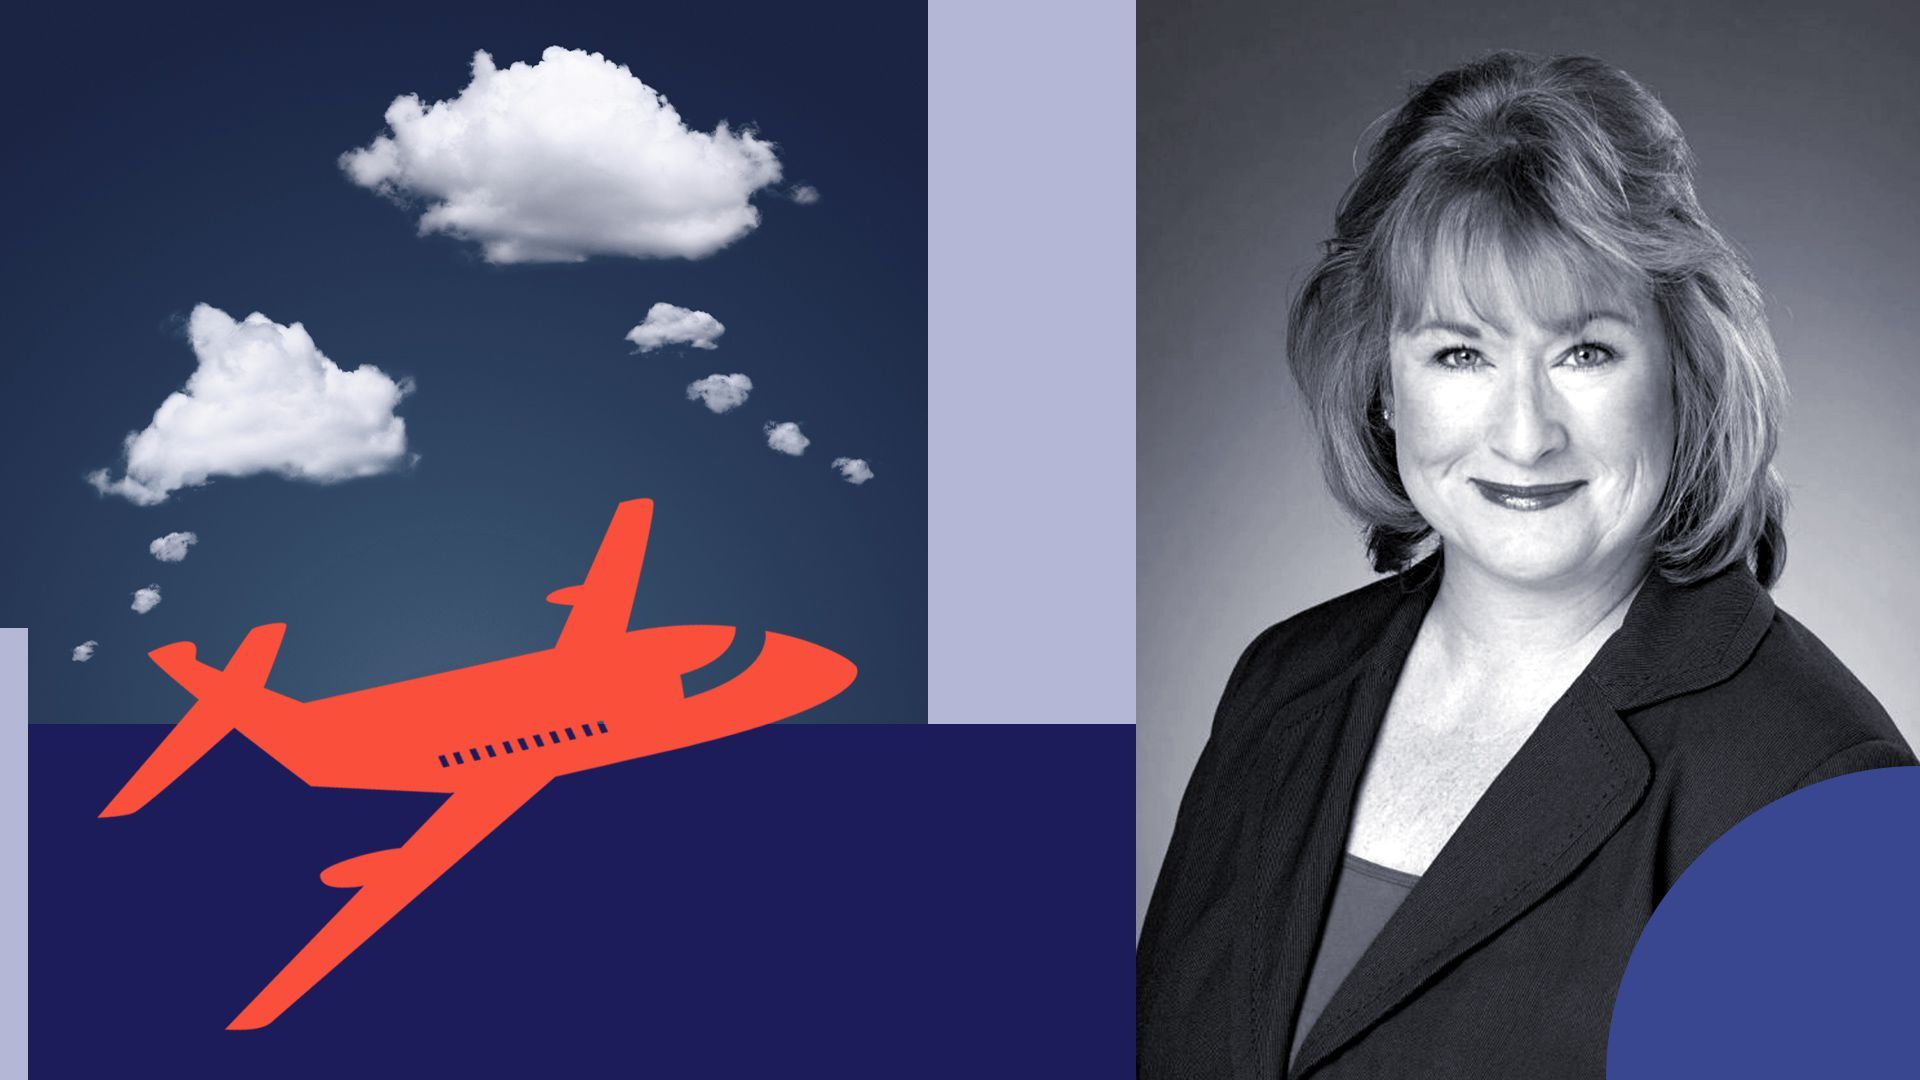 Photo illustration of Linda Rutherford with an image of clouds in the shape of speech bubbles and an airplane.